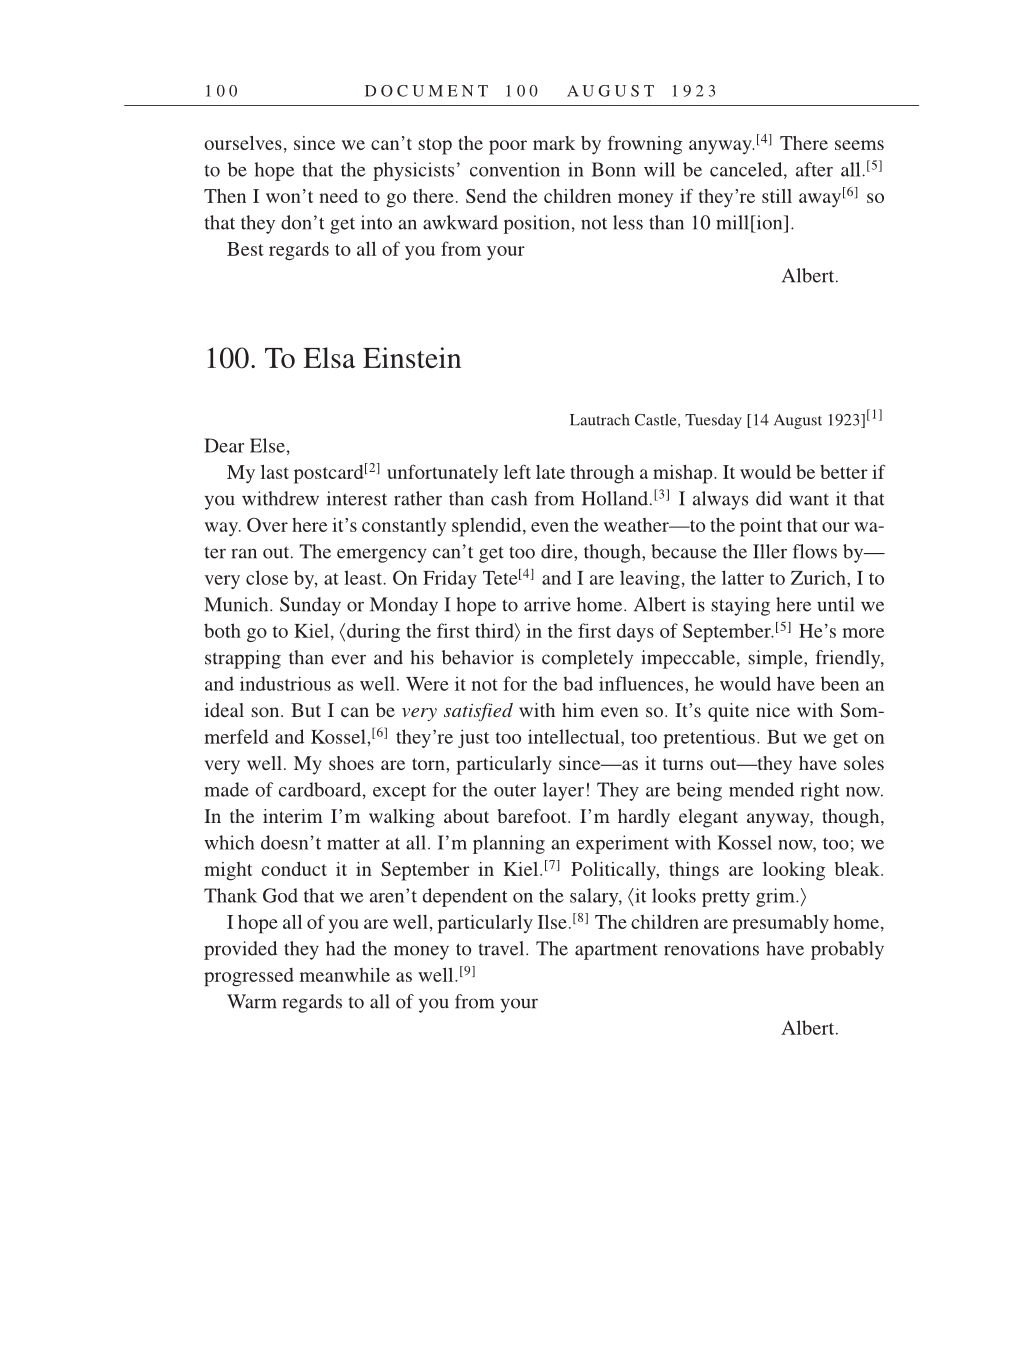 Volume 14: The Berlin Years: Writings & Correspondence, April 1923-May 1925 (English Translation Supplement) page 100